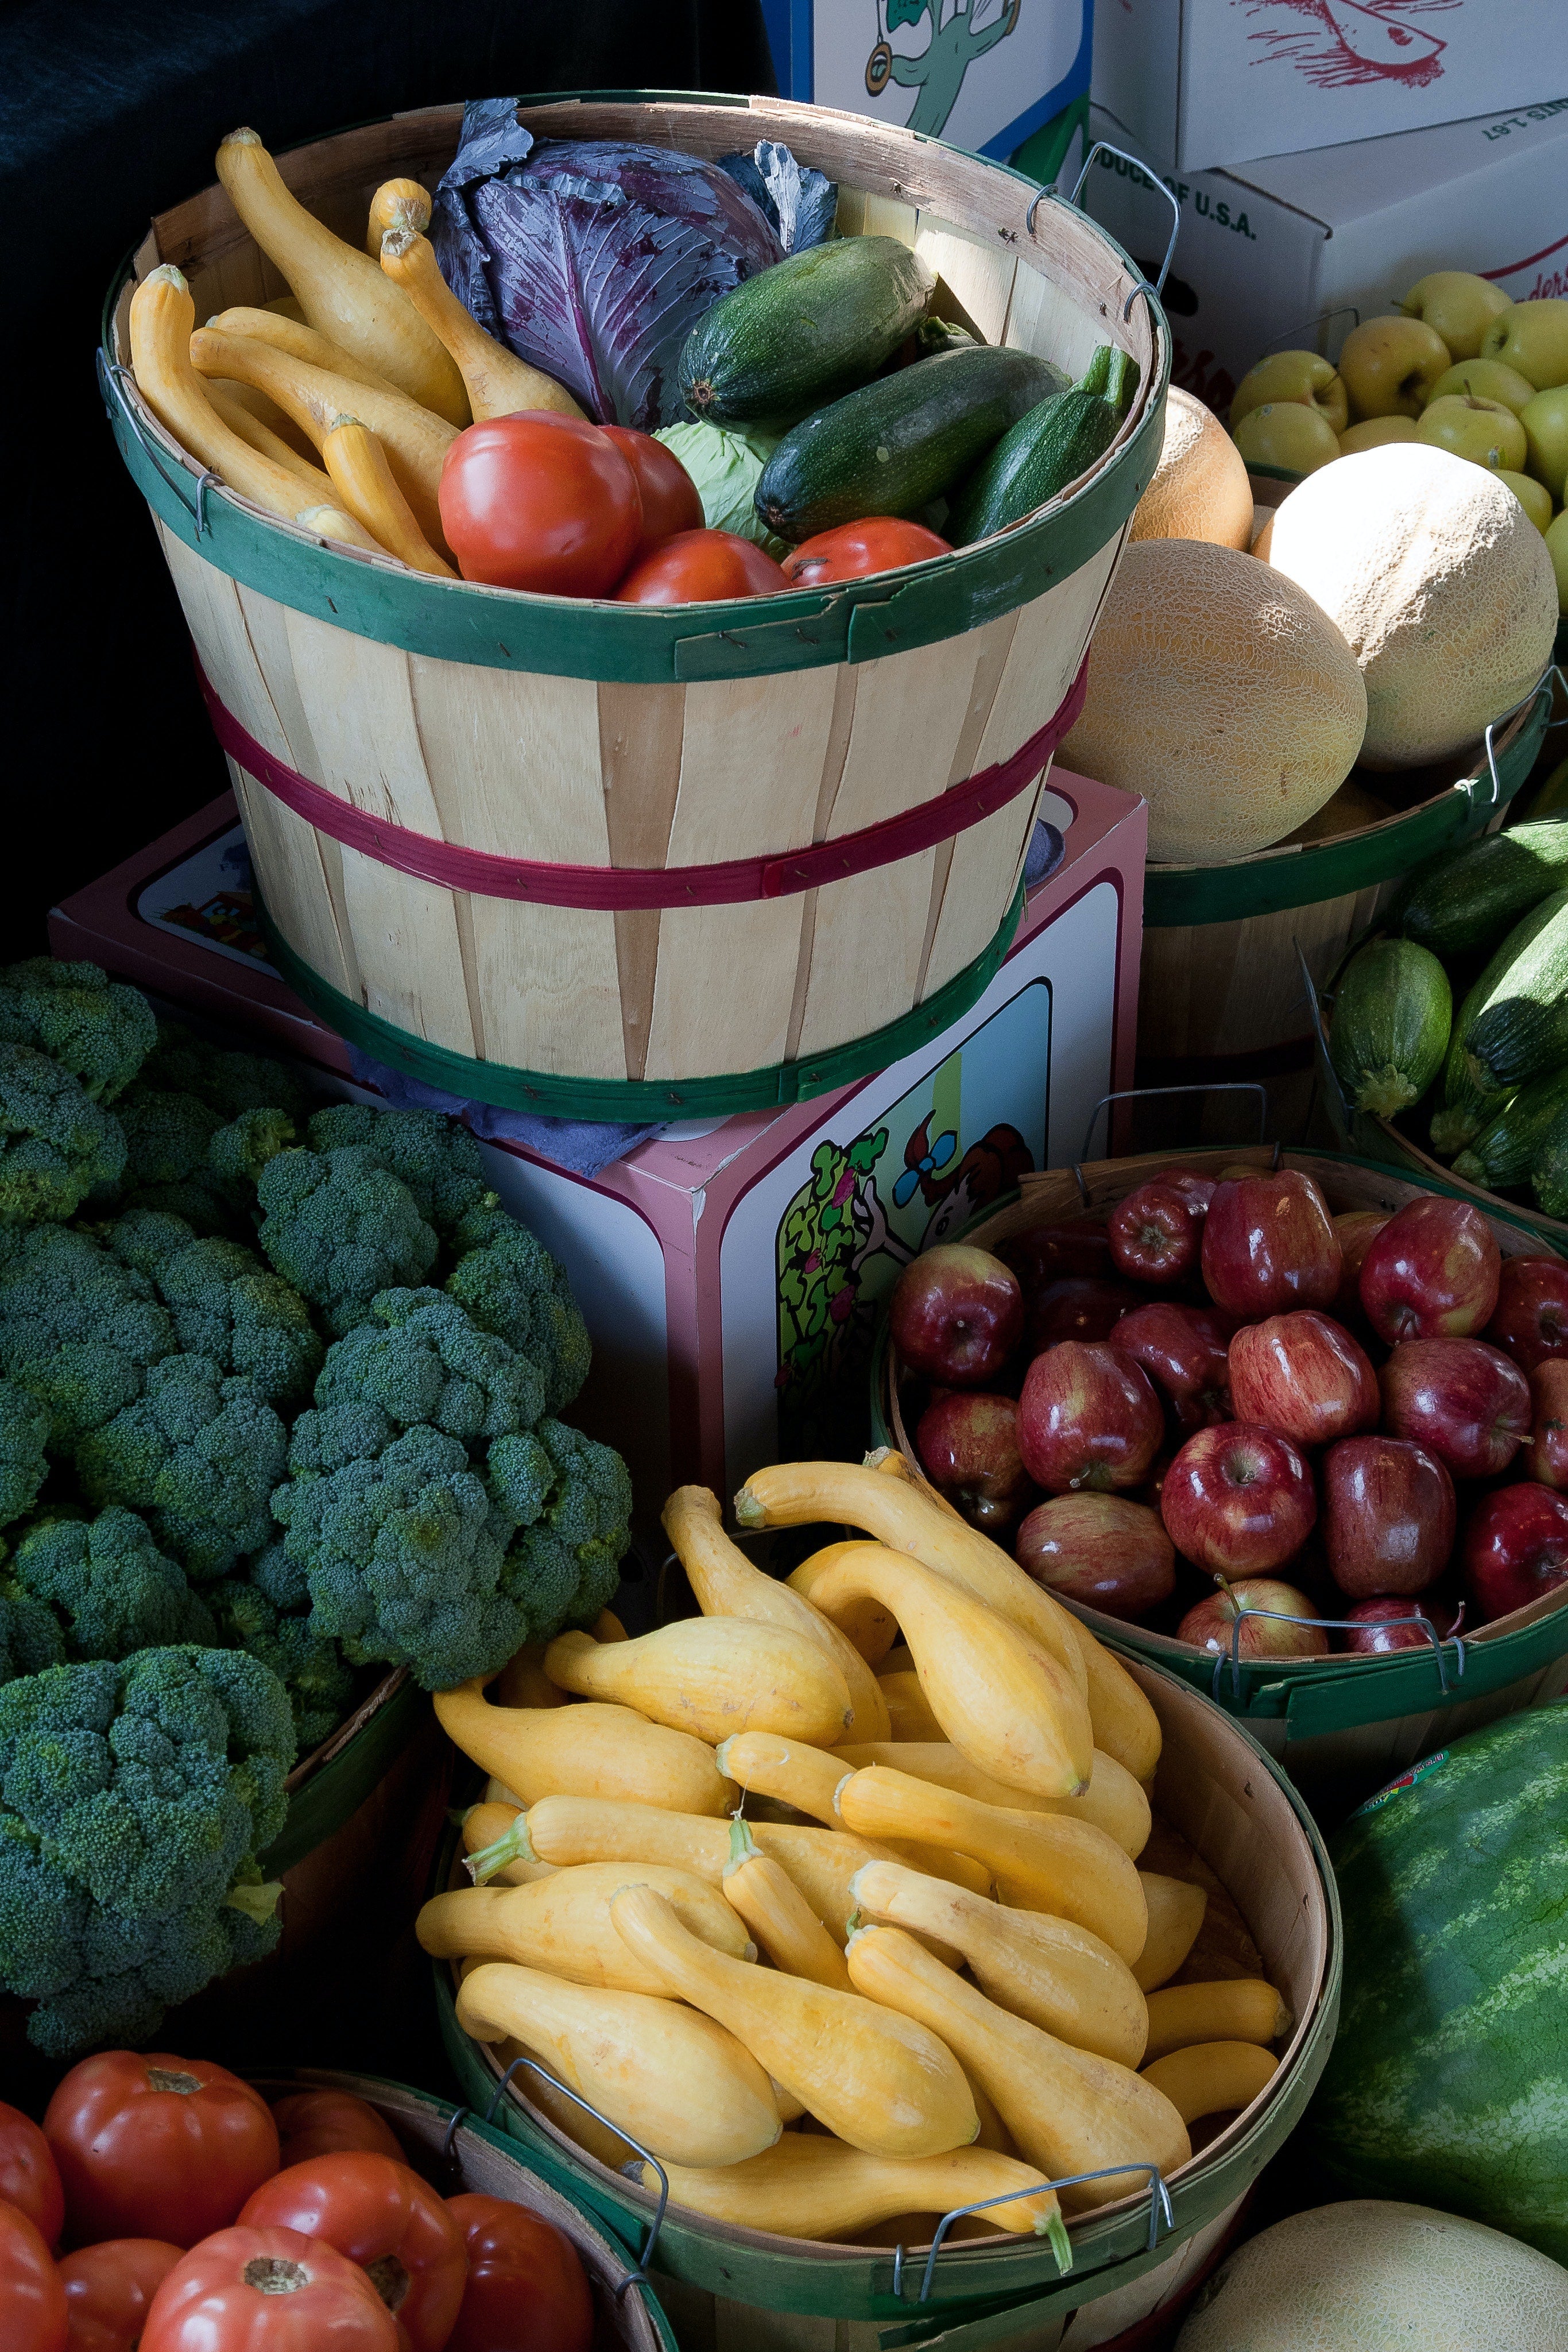 A variety of fresh vegetables at a farmer's market